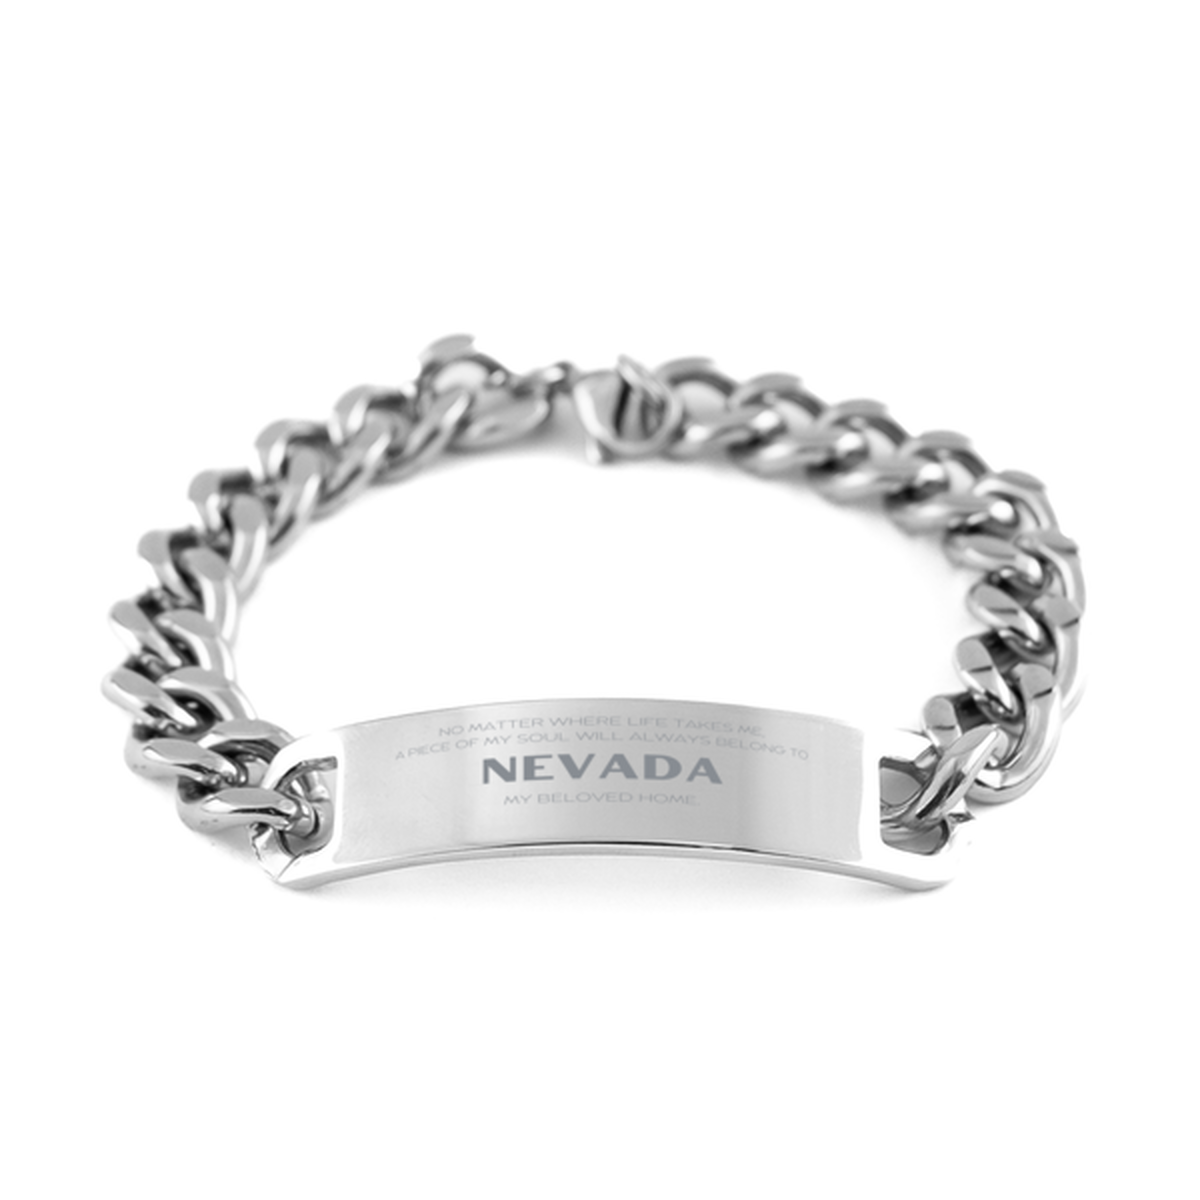 Love Nevada State Gifts, My soul will always belong to Nevada, Proud Cuban Chain Stainless Steel Bracelet, Birthday Unique Gifts For Nevada Men, Women, Friends